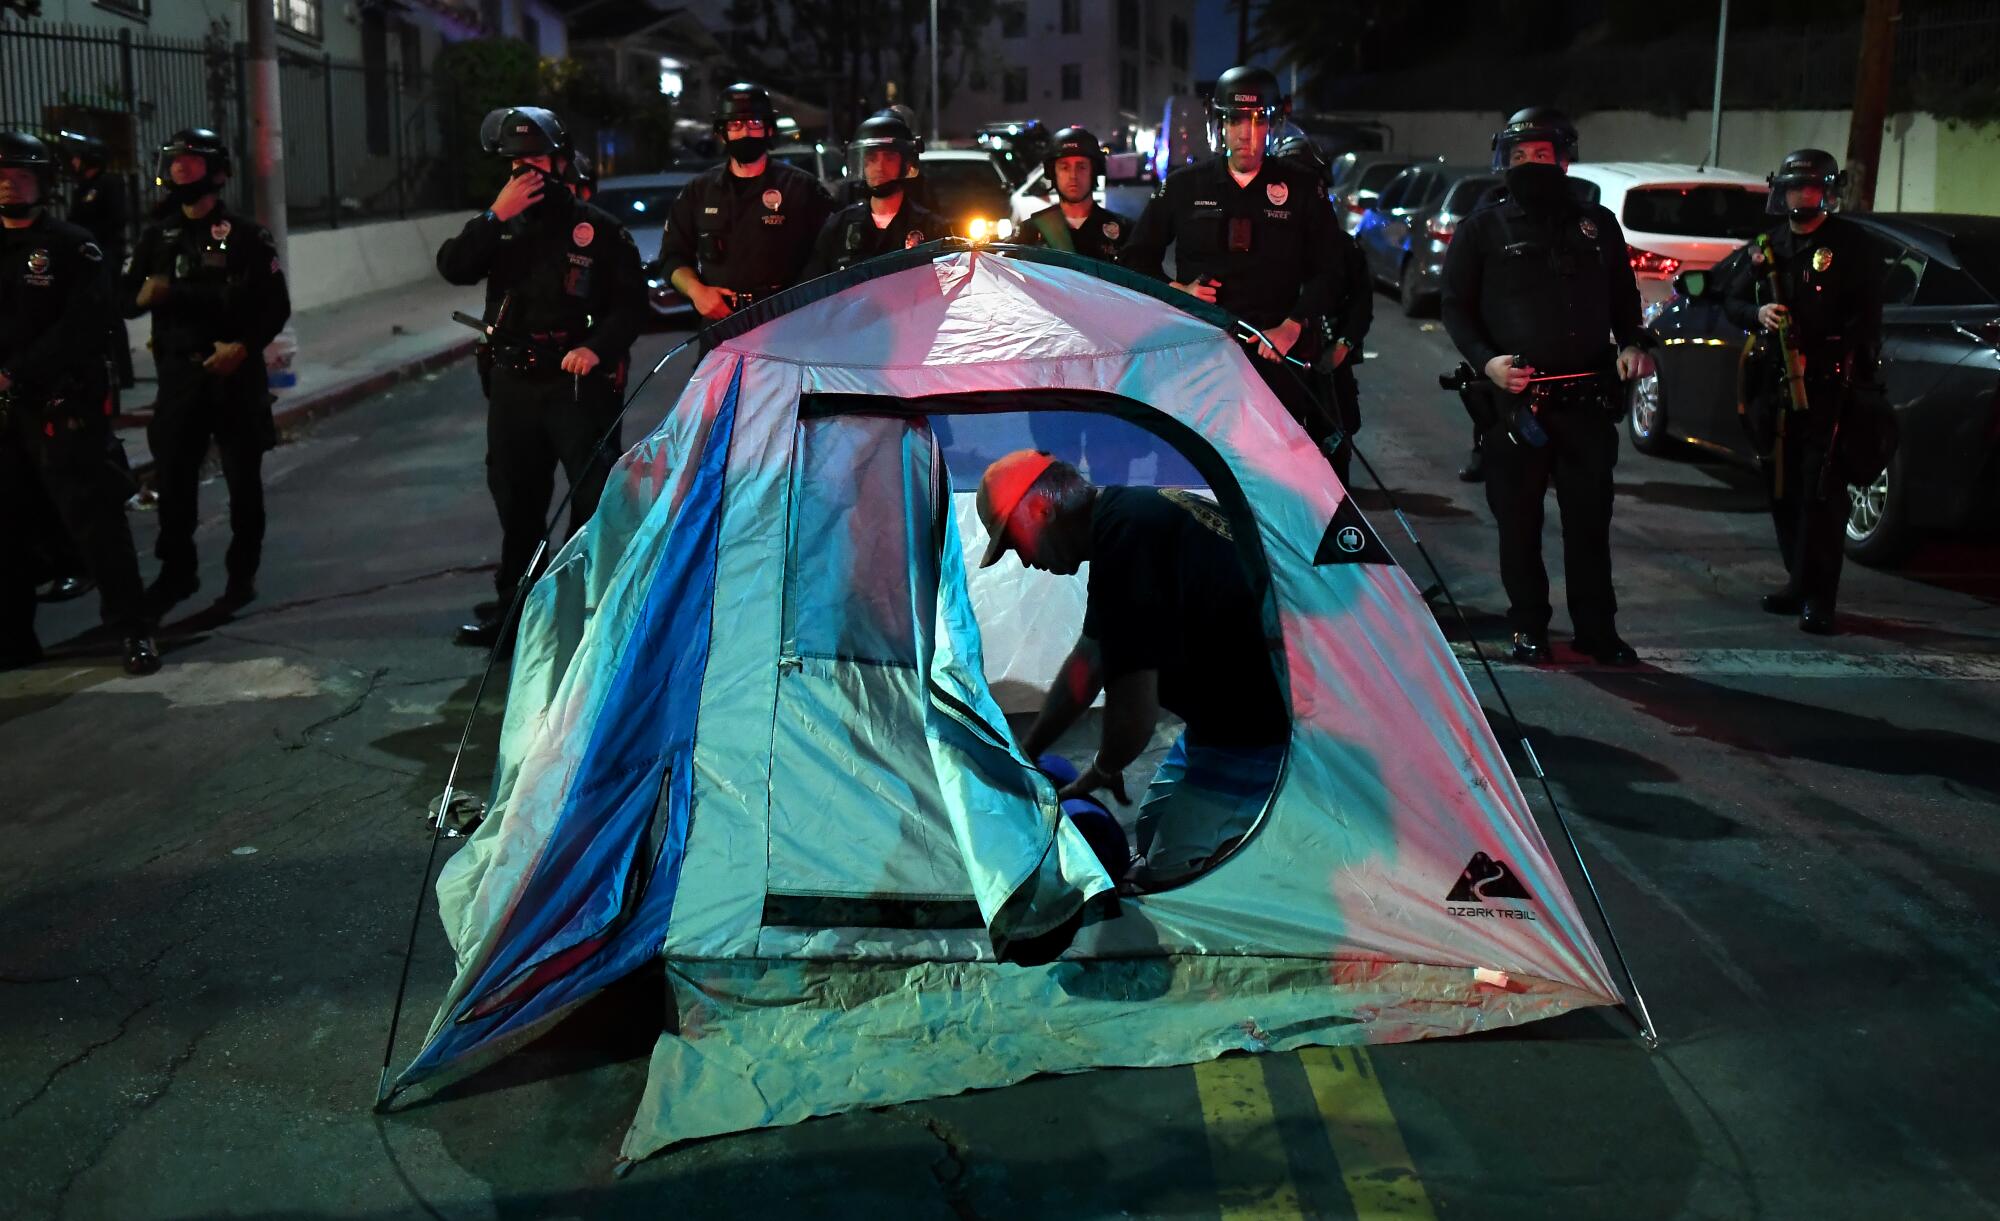 Police stand beside a man in a tent.